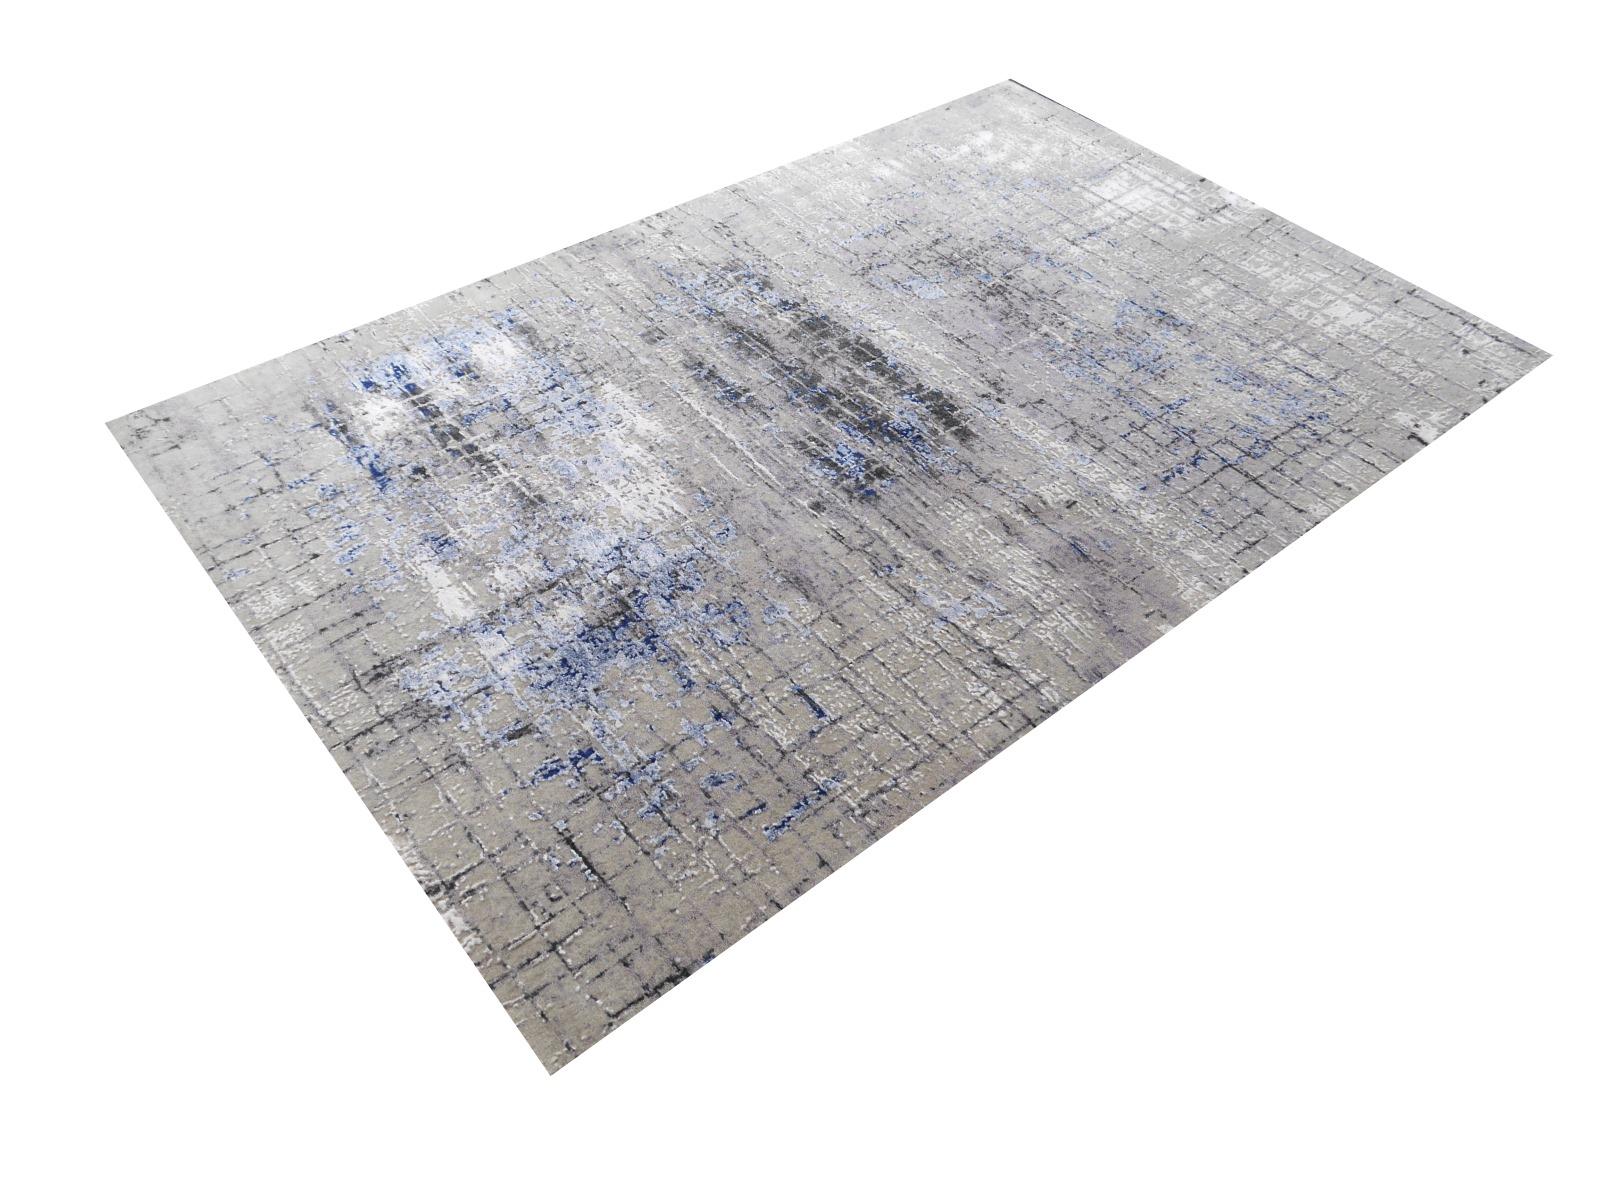 A stunning modern rug in contemporary design.

Design: Modern
Collection: Anastasia by Djoharian Design
Size: 200 x 135 cm, 6.6 x 4.5 ft, no fringes / tassels. 
Materials: Wool, bamboo silk (higher pile, 3D look)
Size: medium size